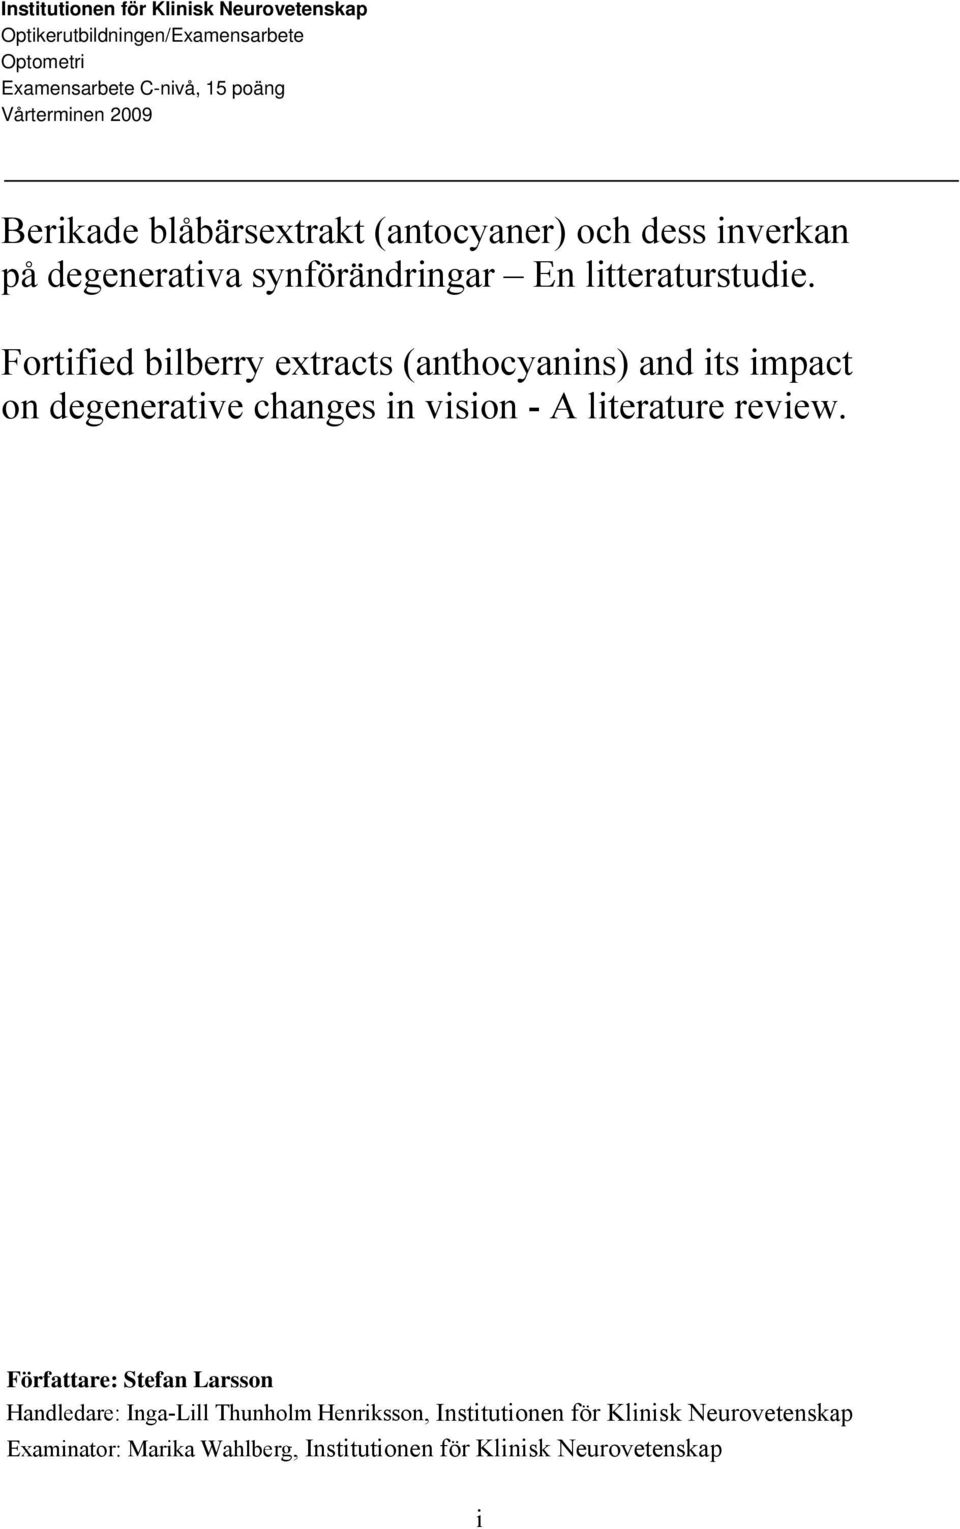 Fortified bilberry extracts (anthocyanins) and its impact on degenerative changes in vision - A literature review.